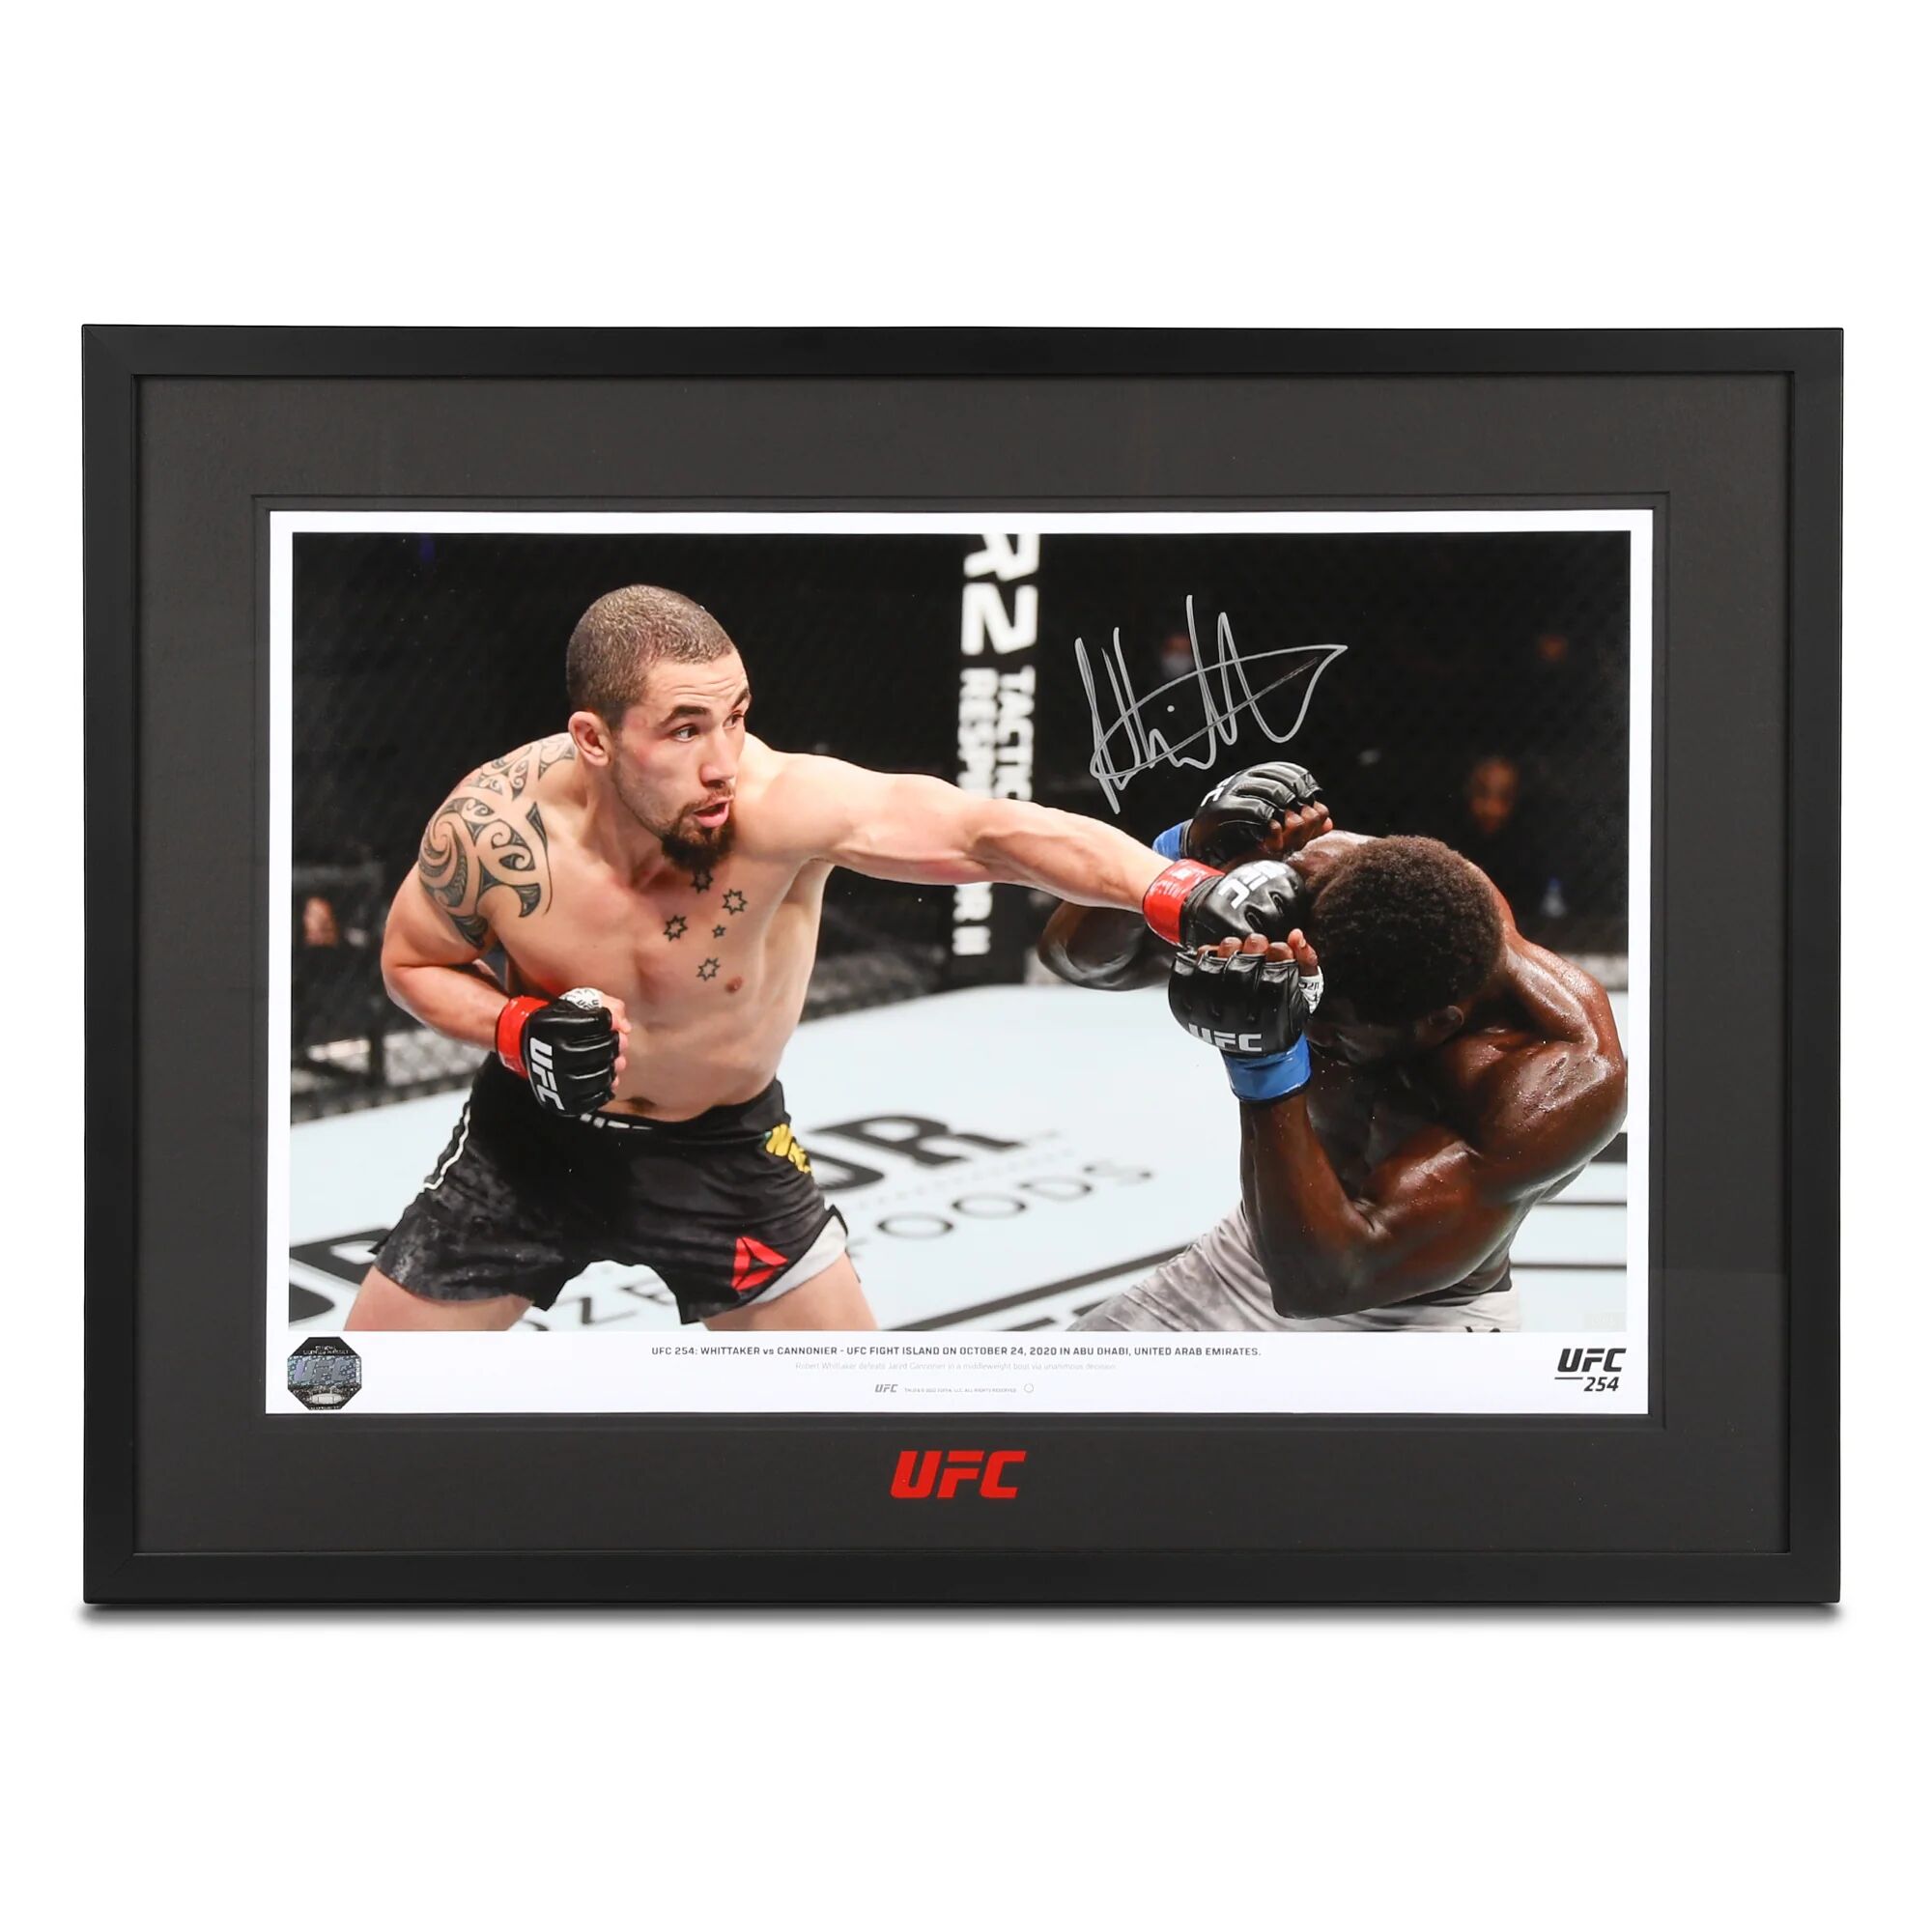 UFC Collectibles Robert Whittaker Signed Photo UFC 254